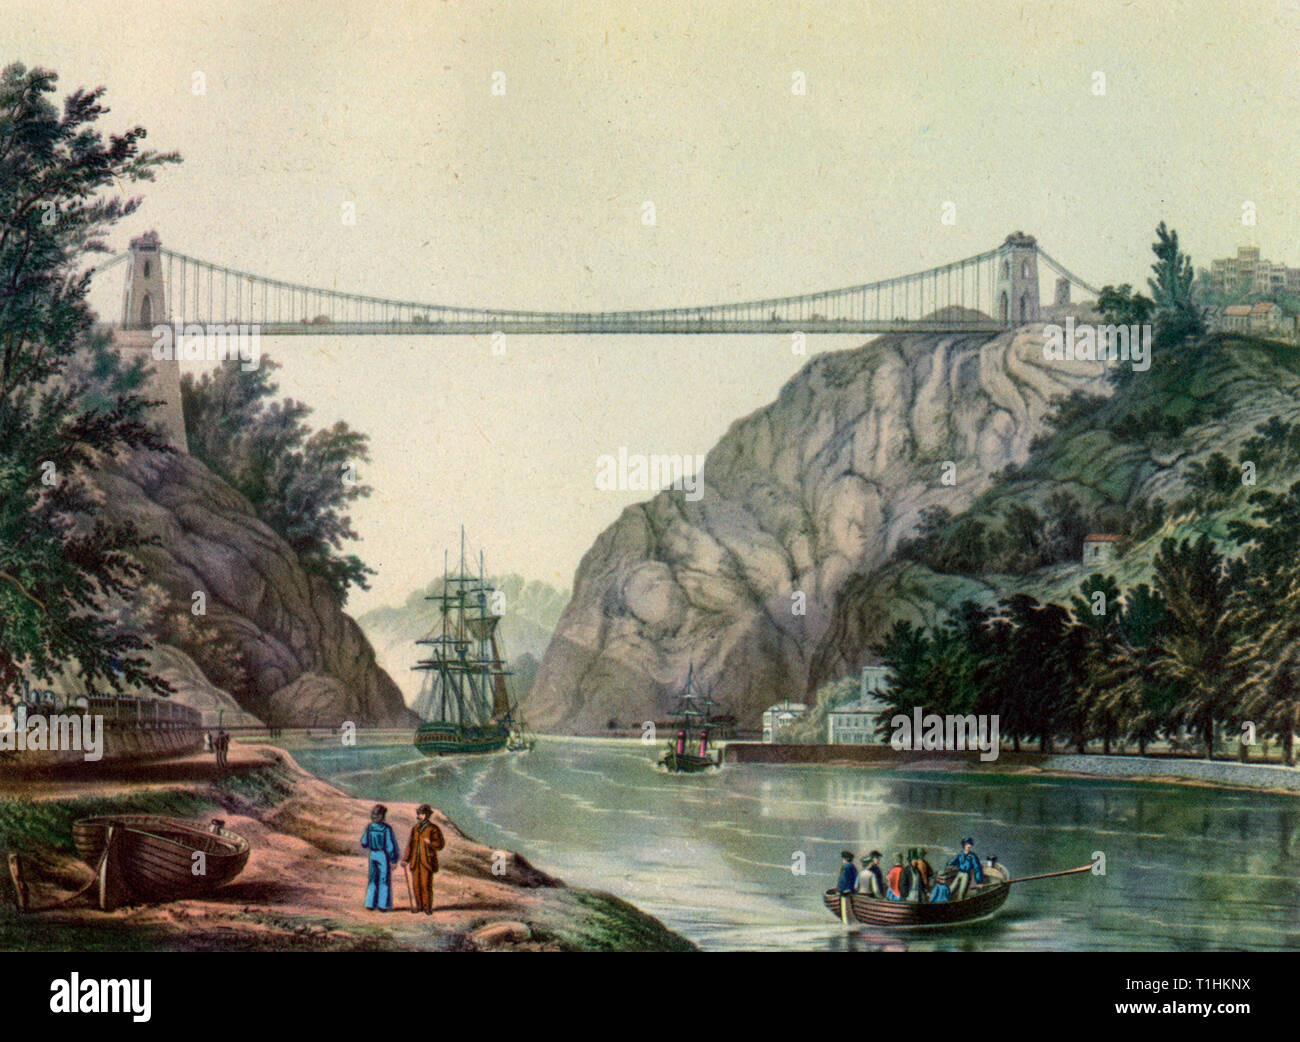 Clifton Suspension Bridge over the River Avon, c1864. By R. S. Groom. The Clifton Suspension Bridge opened in 1864 and was designed by Isambard Kingdom Brunel. The ground breaking structure spans the Avon Gorge and the River Avon and links Clifton in Bristol to Leigh Woods in North Somerset. Stock Photo